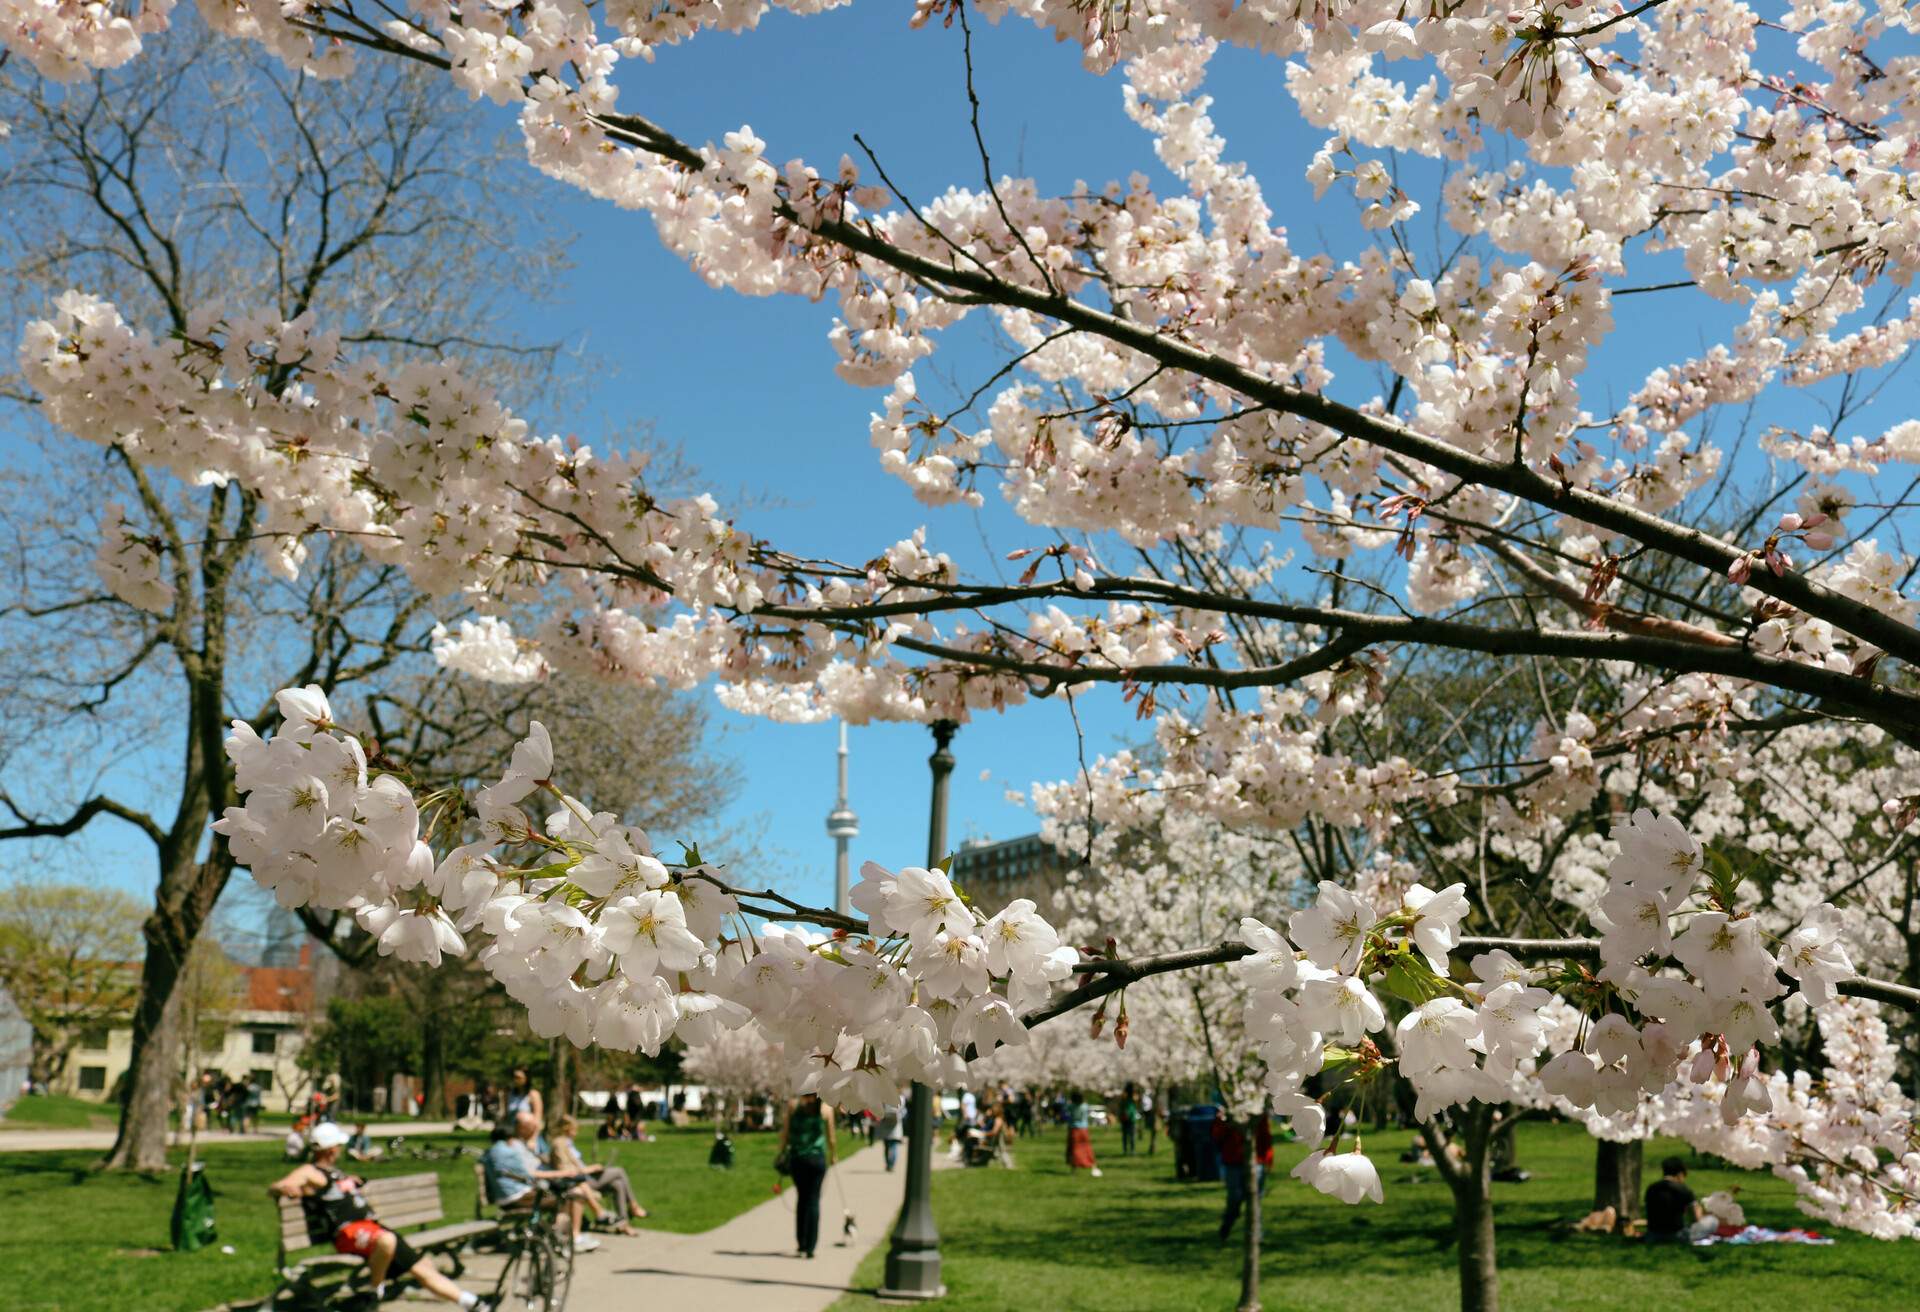 Gorgeous display of cherry blossoms with the iconic CN tower in the background. Trinity-Bellwoods Park of Toronto.